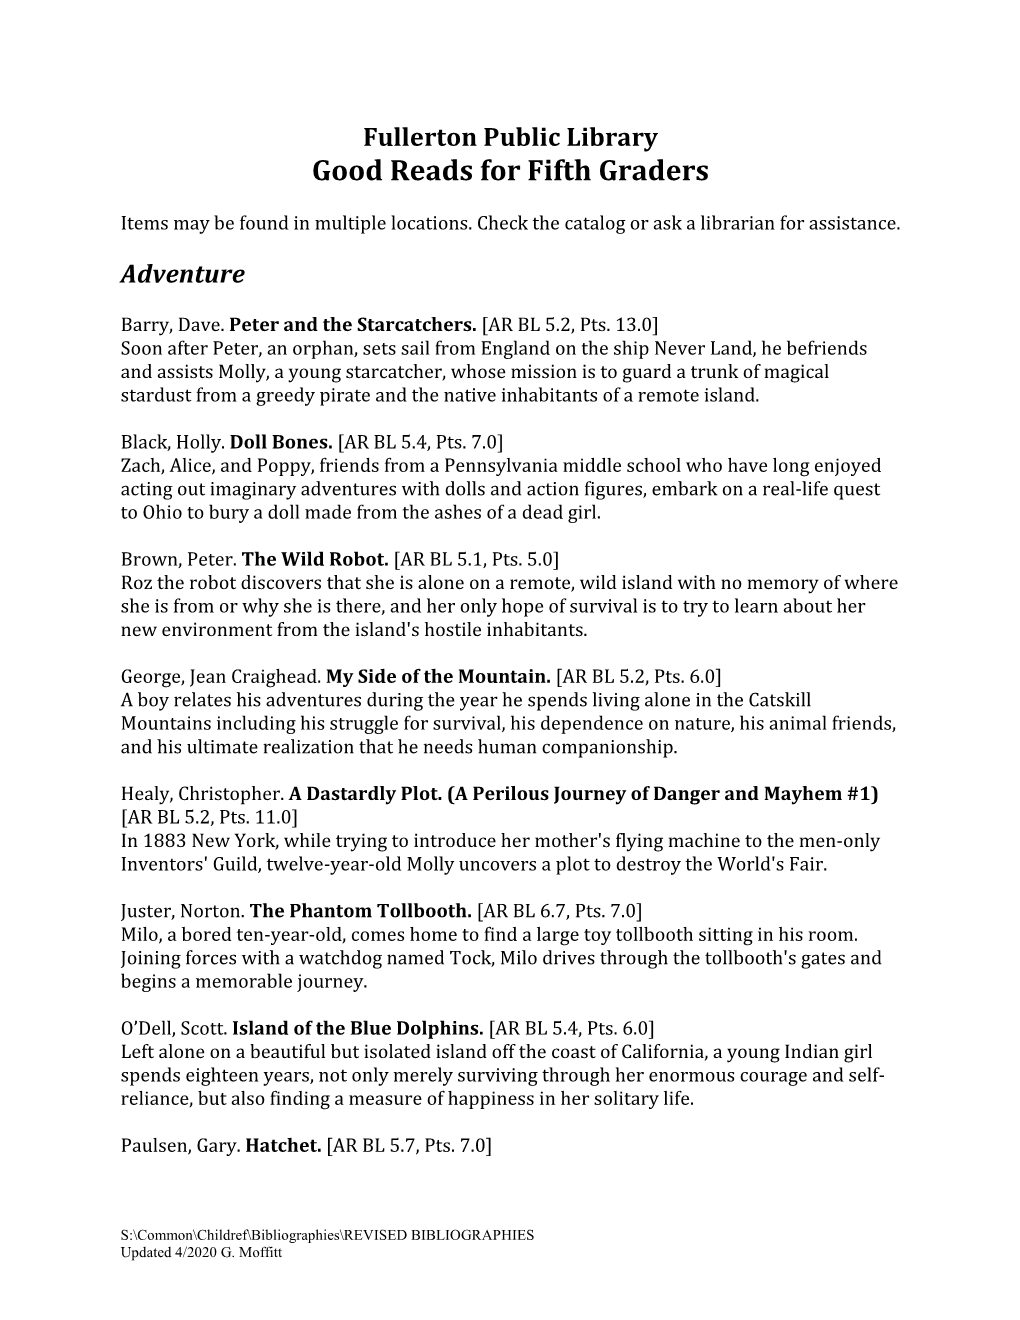 Good Reads for Fifth Graders